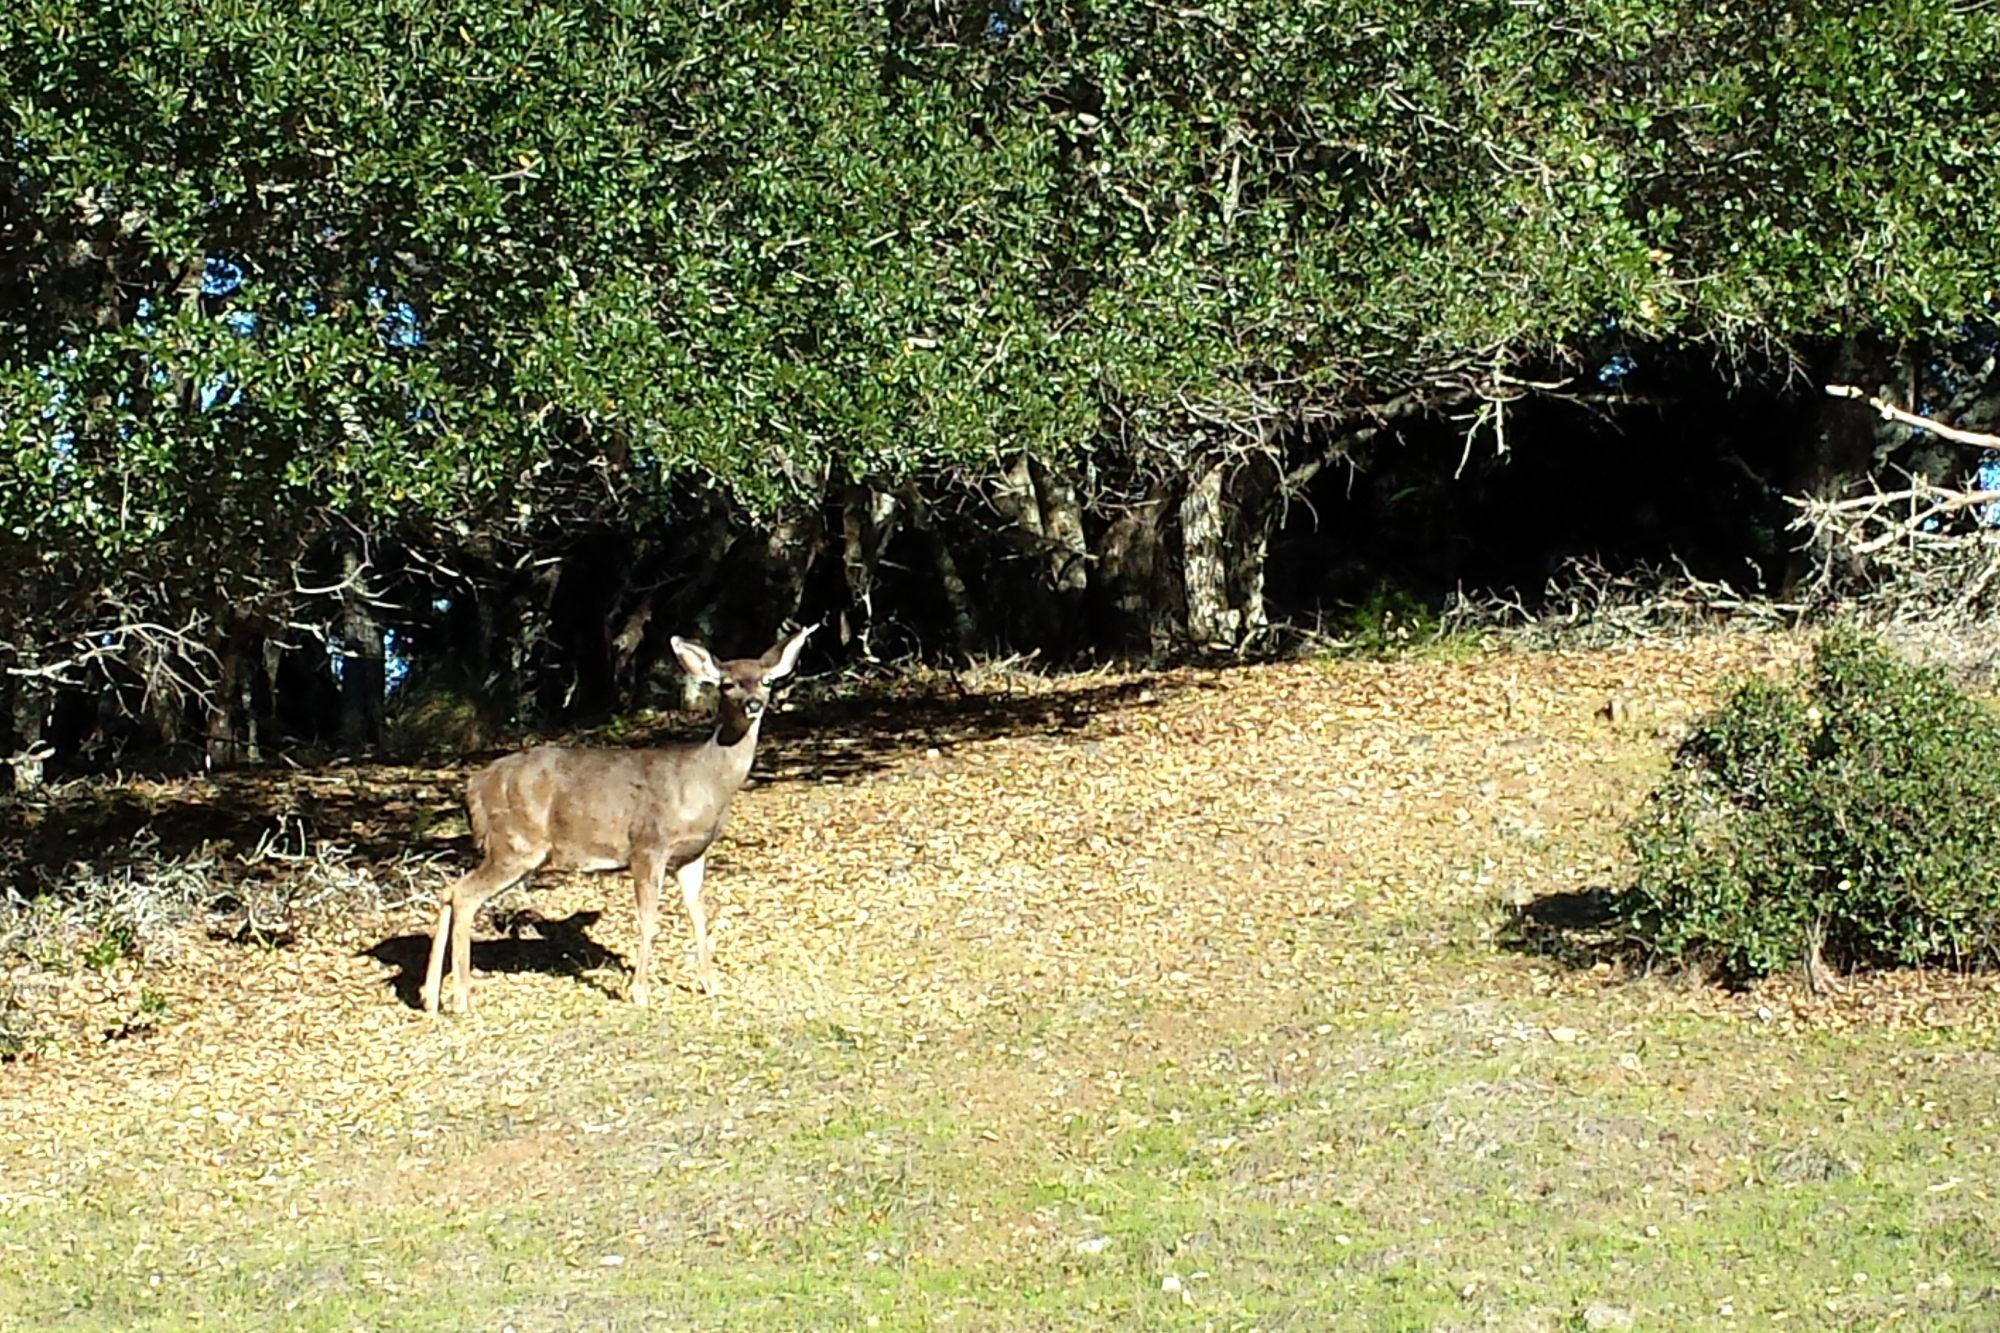 A deer in a clearing in front of trees.